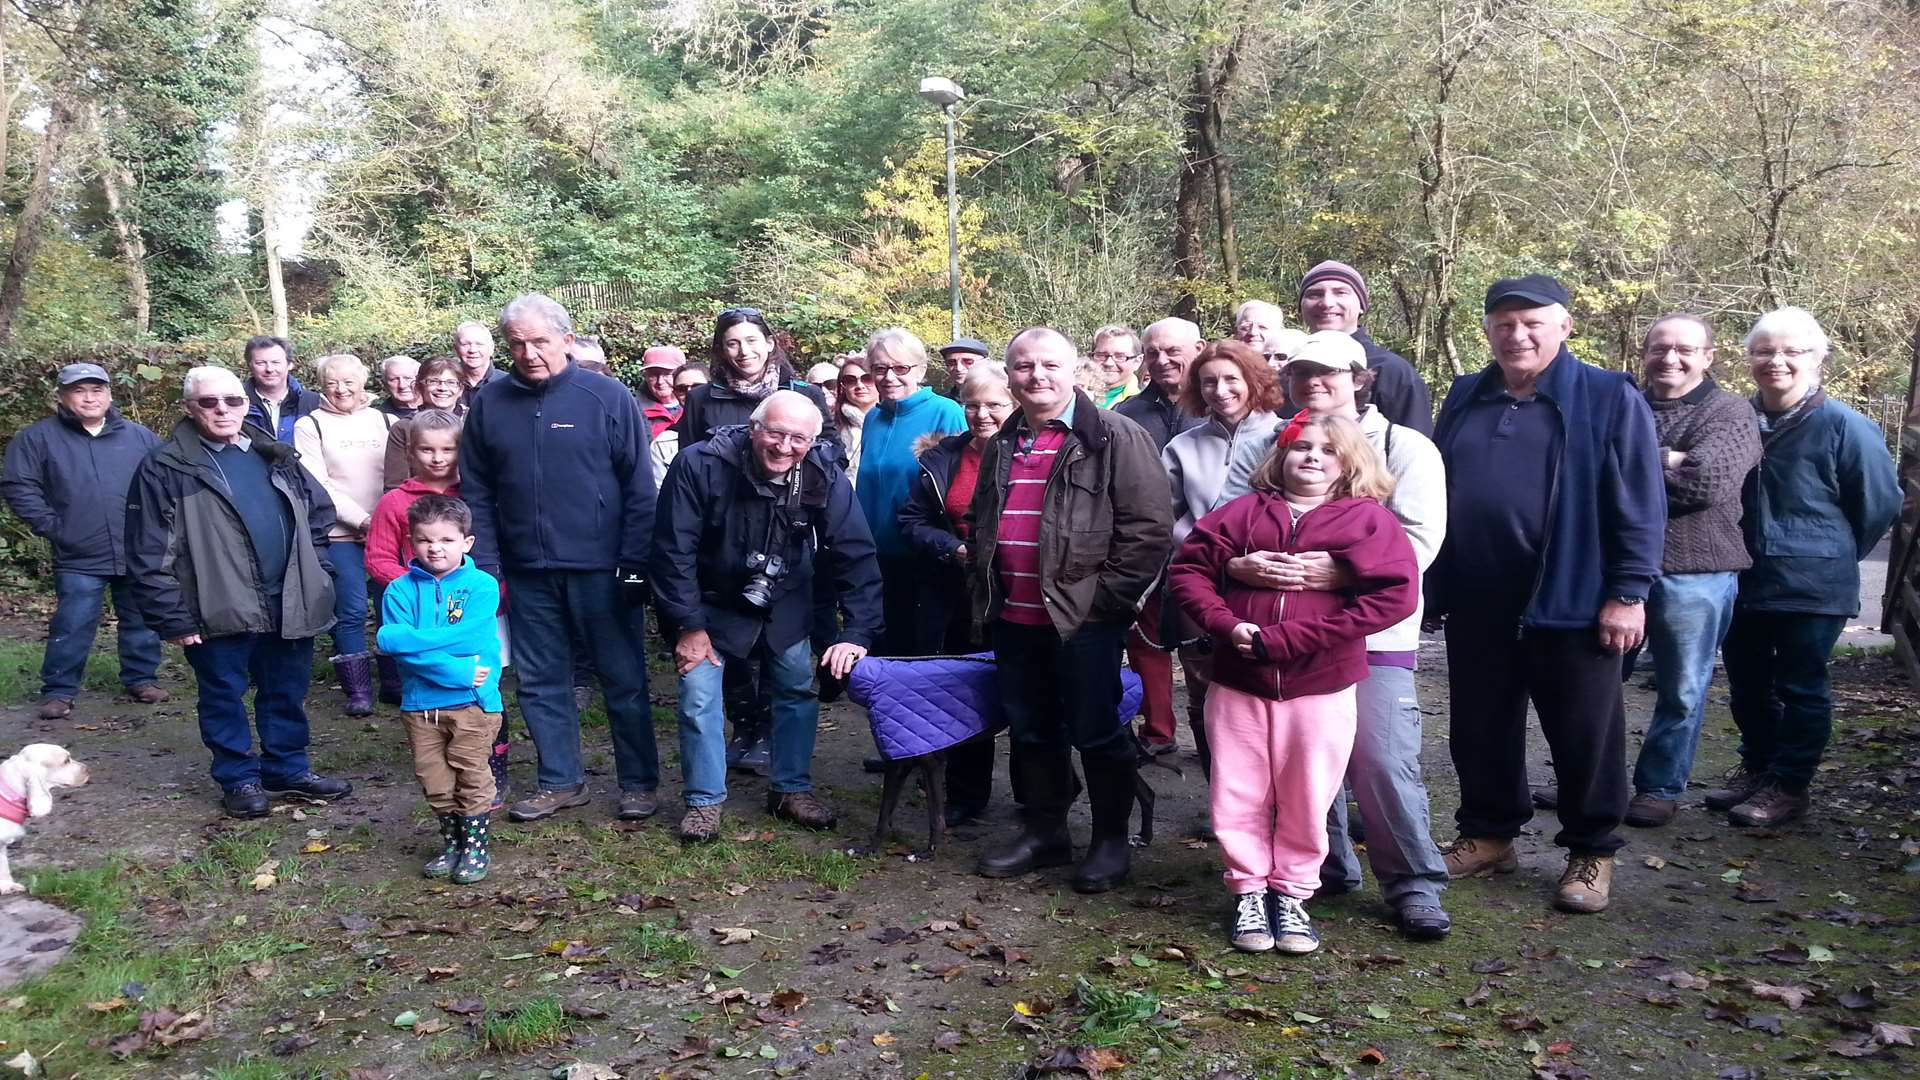 Walkers gathered at the Conservation Cabin in Cave Hill